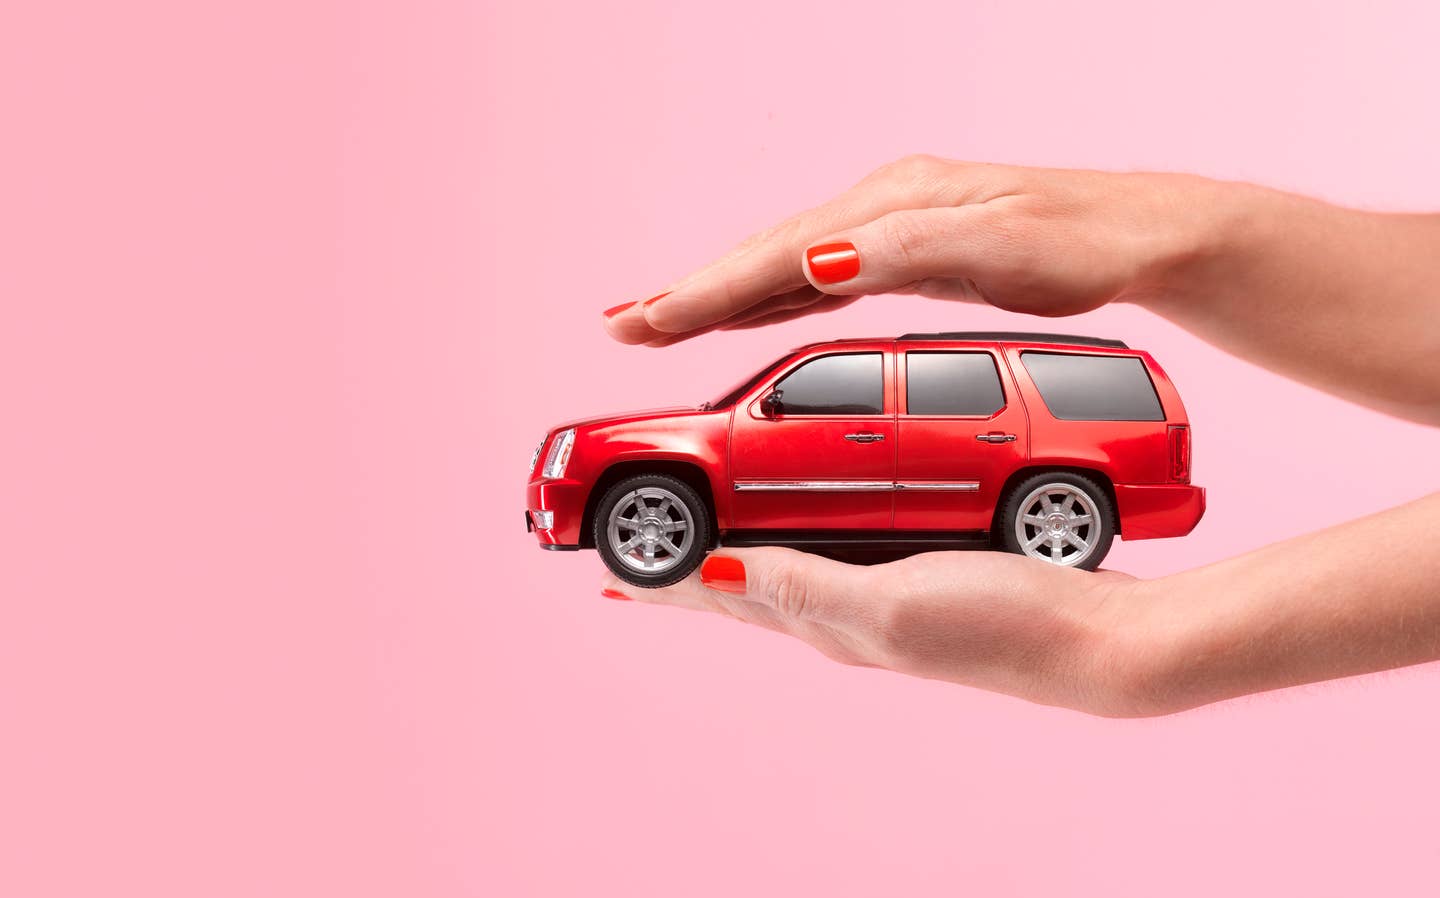 A hand holding a small car.